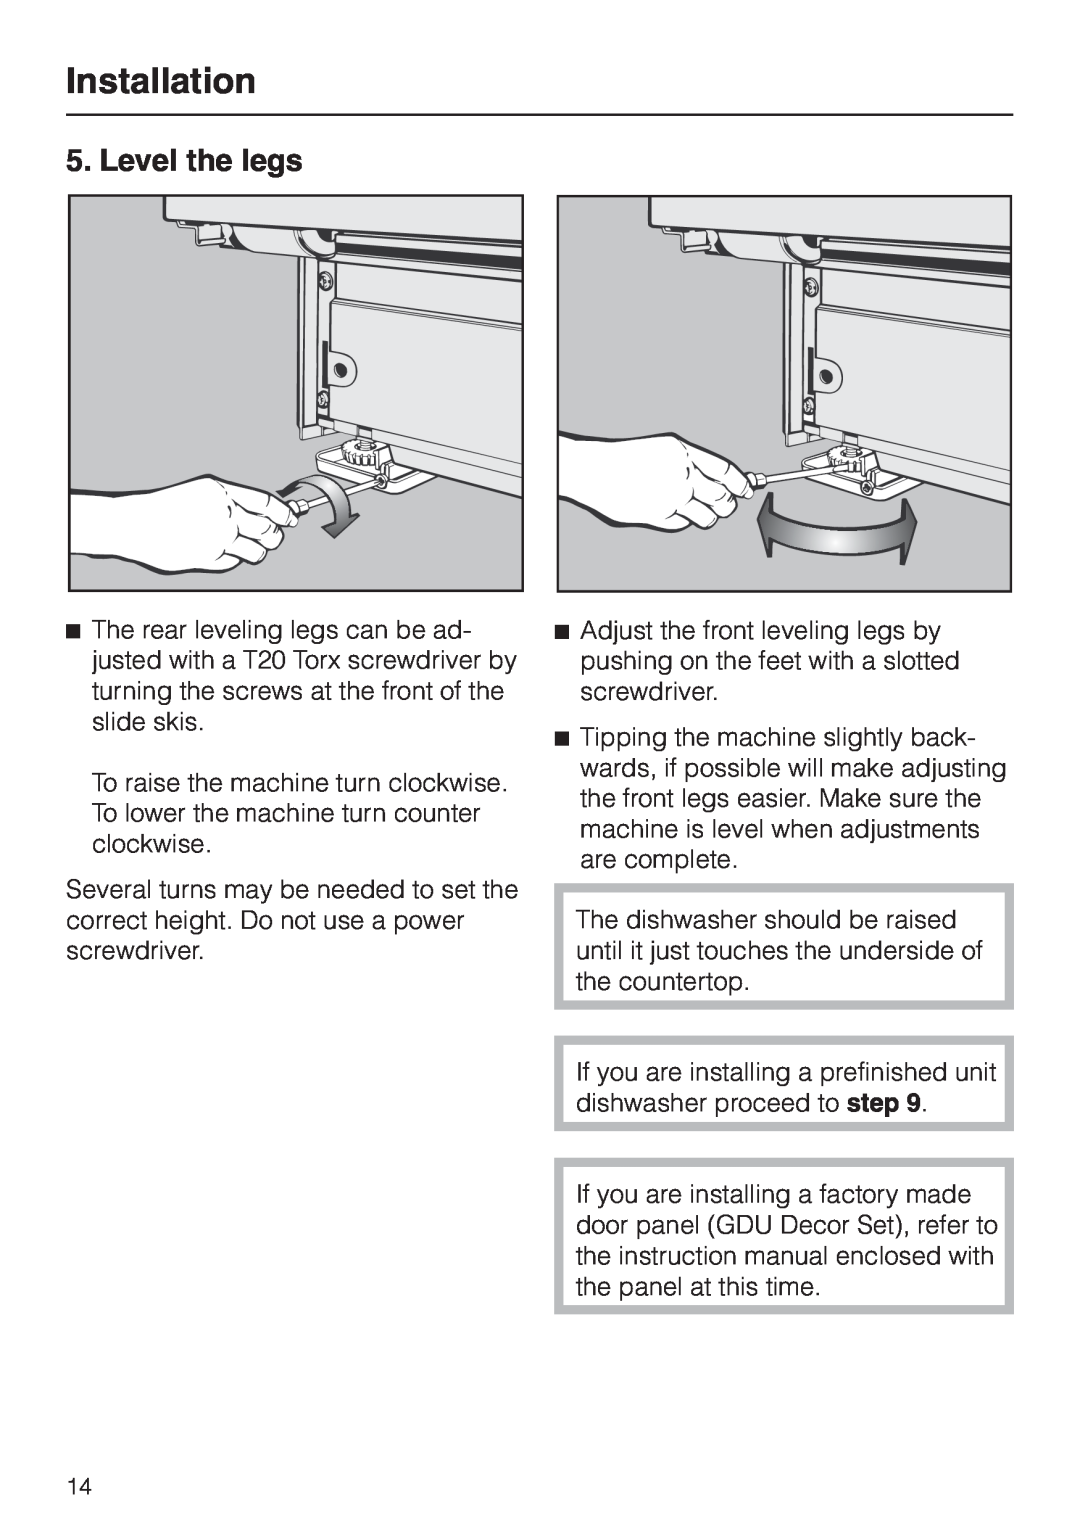 Miele HG02 installation instructions Level the legs, Installation 